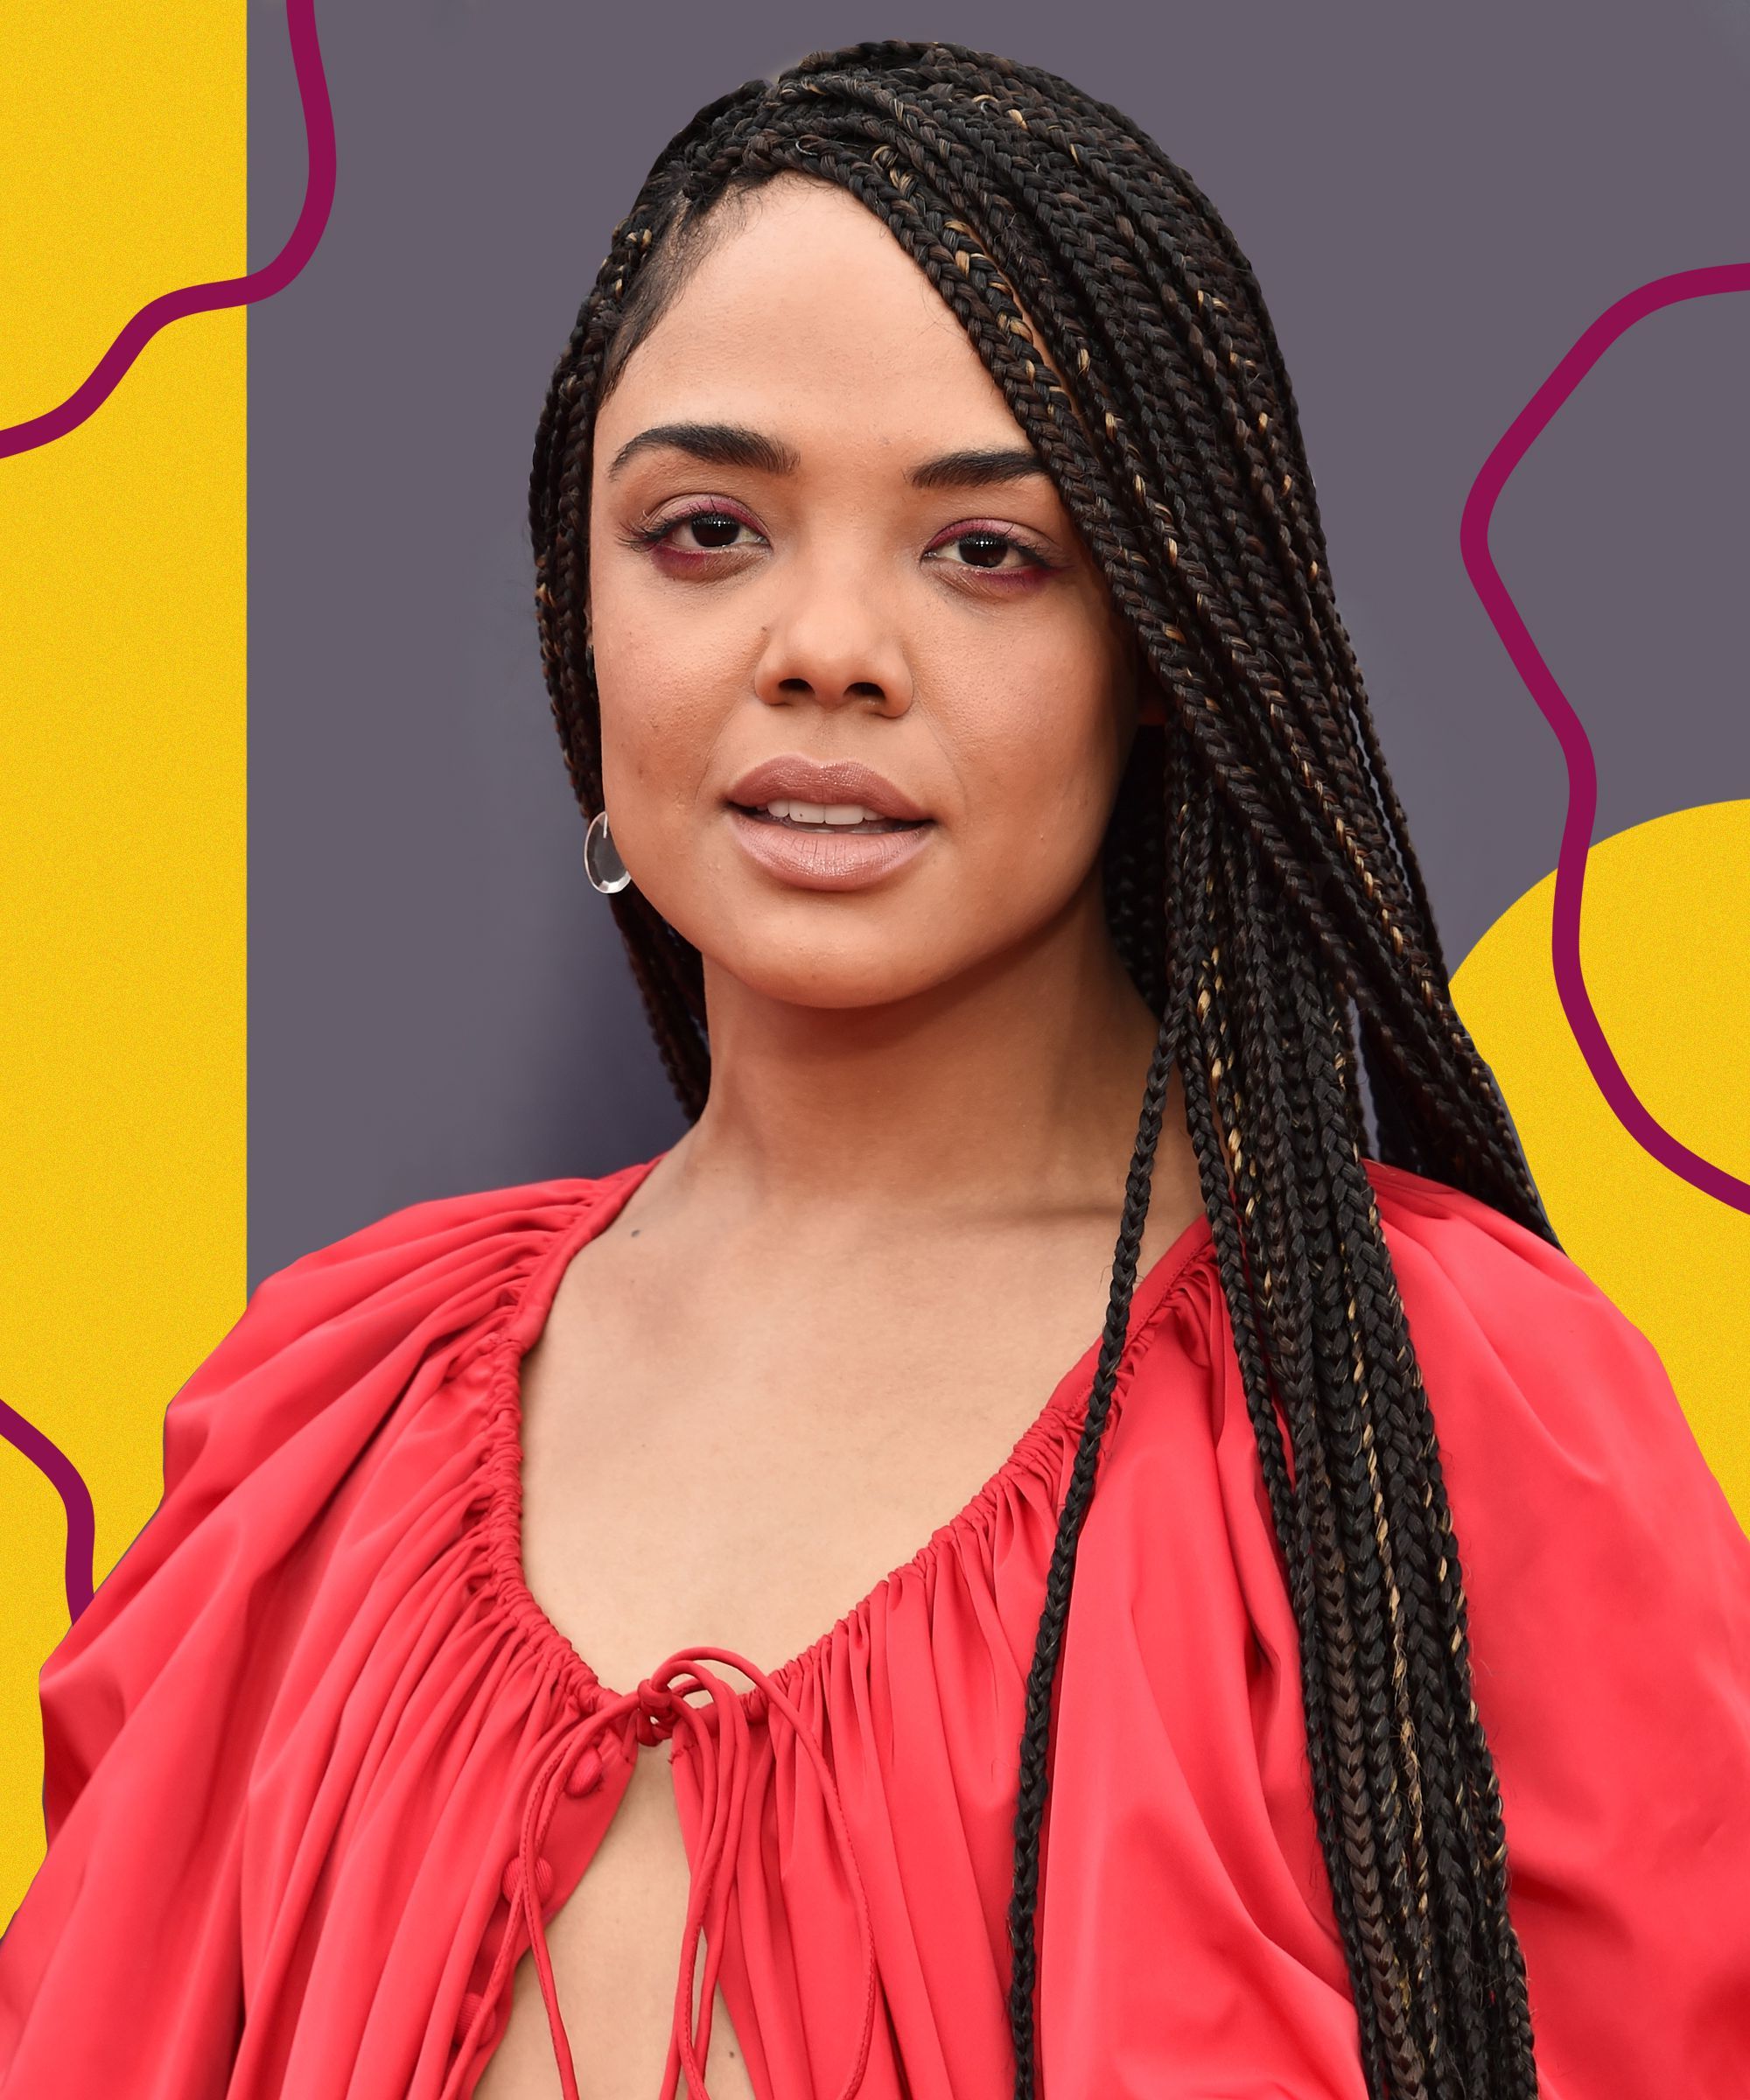 Box Braid Hairstyles We Love For Your New 2019 Look Pertaining To Popular All Over Braided Hairstyles (View 8 of 20)